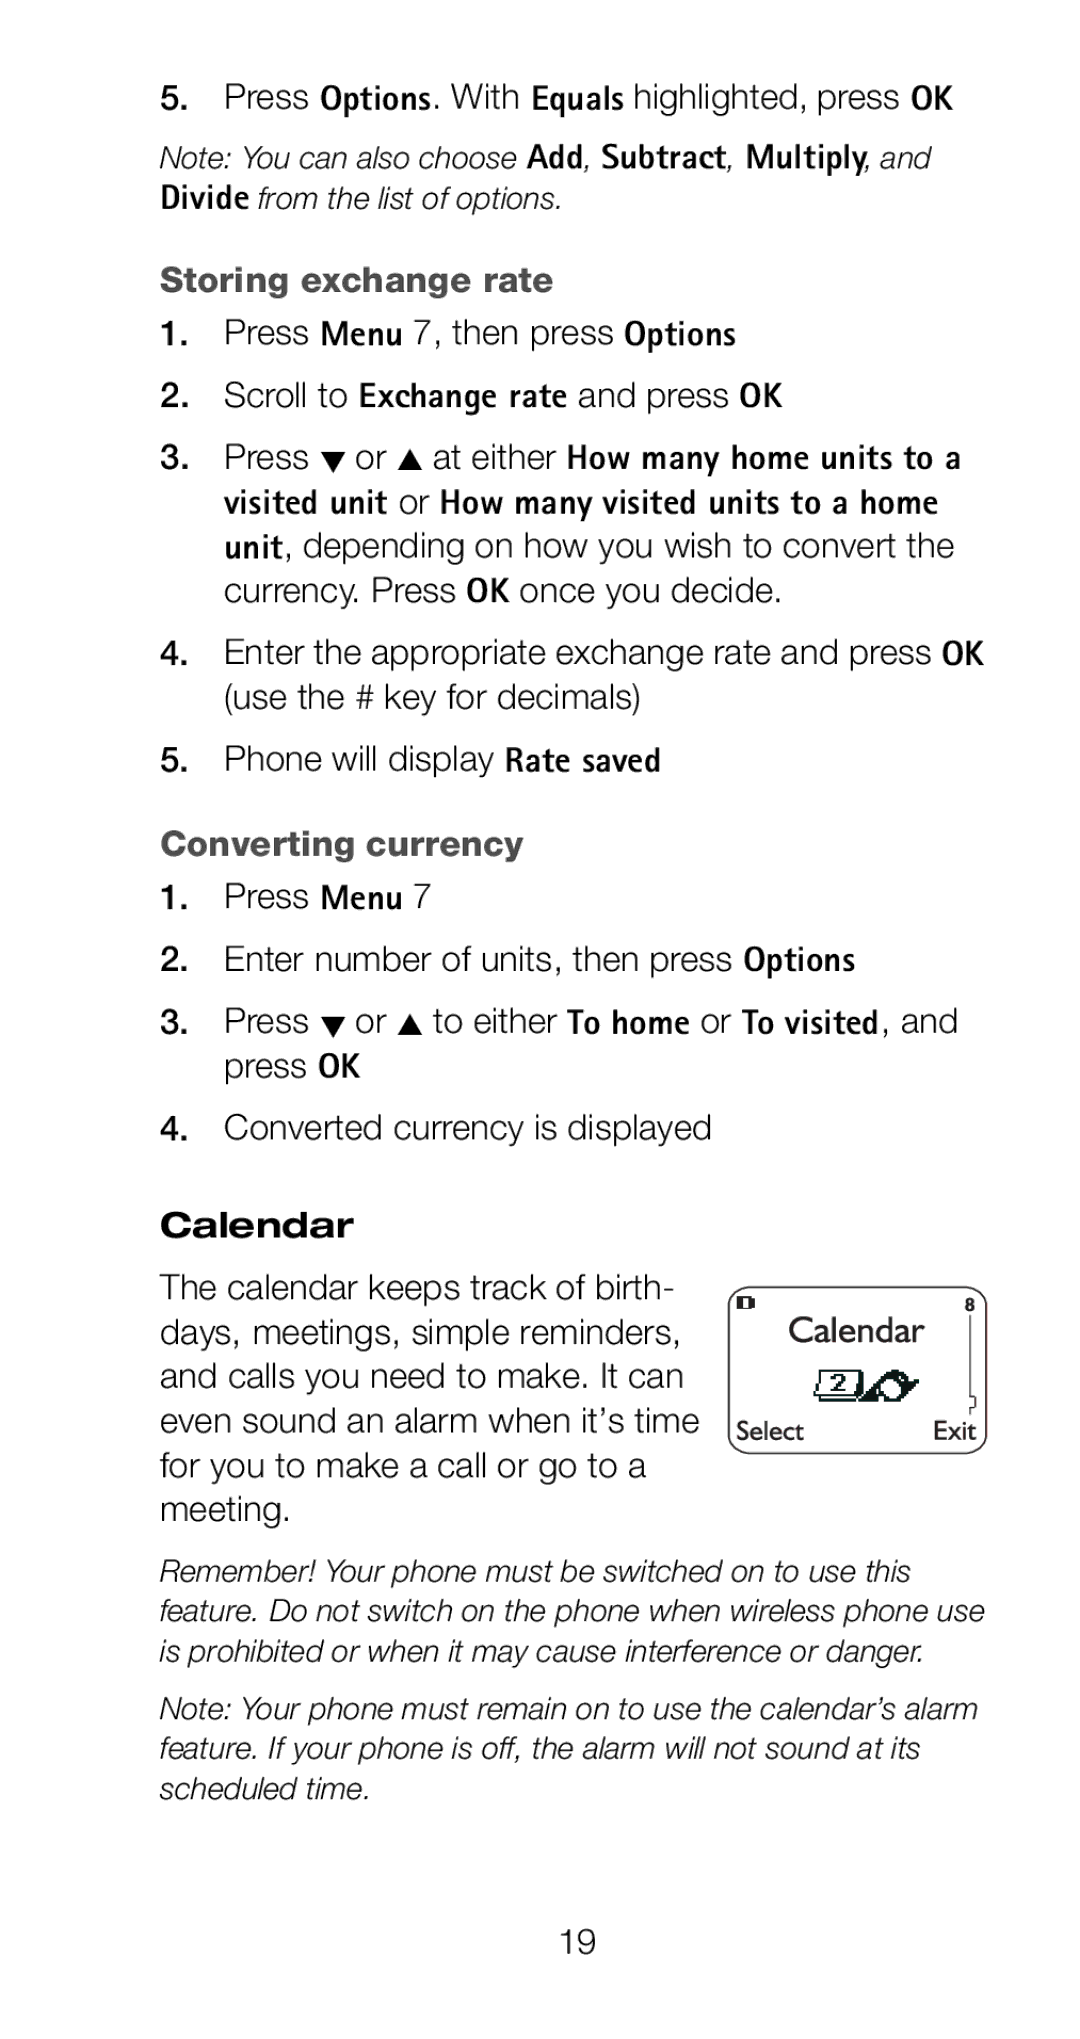 Nokia 6160 manual Press Options. With Equals highlighted, press OK, Storing exchange rate, Converting currency 